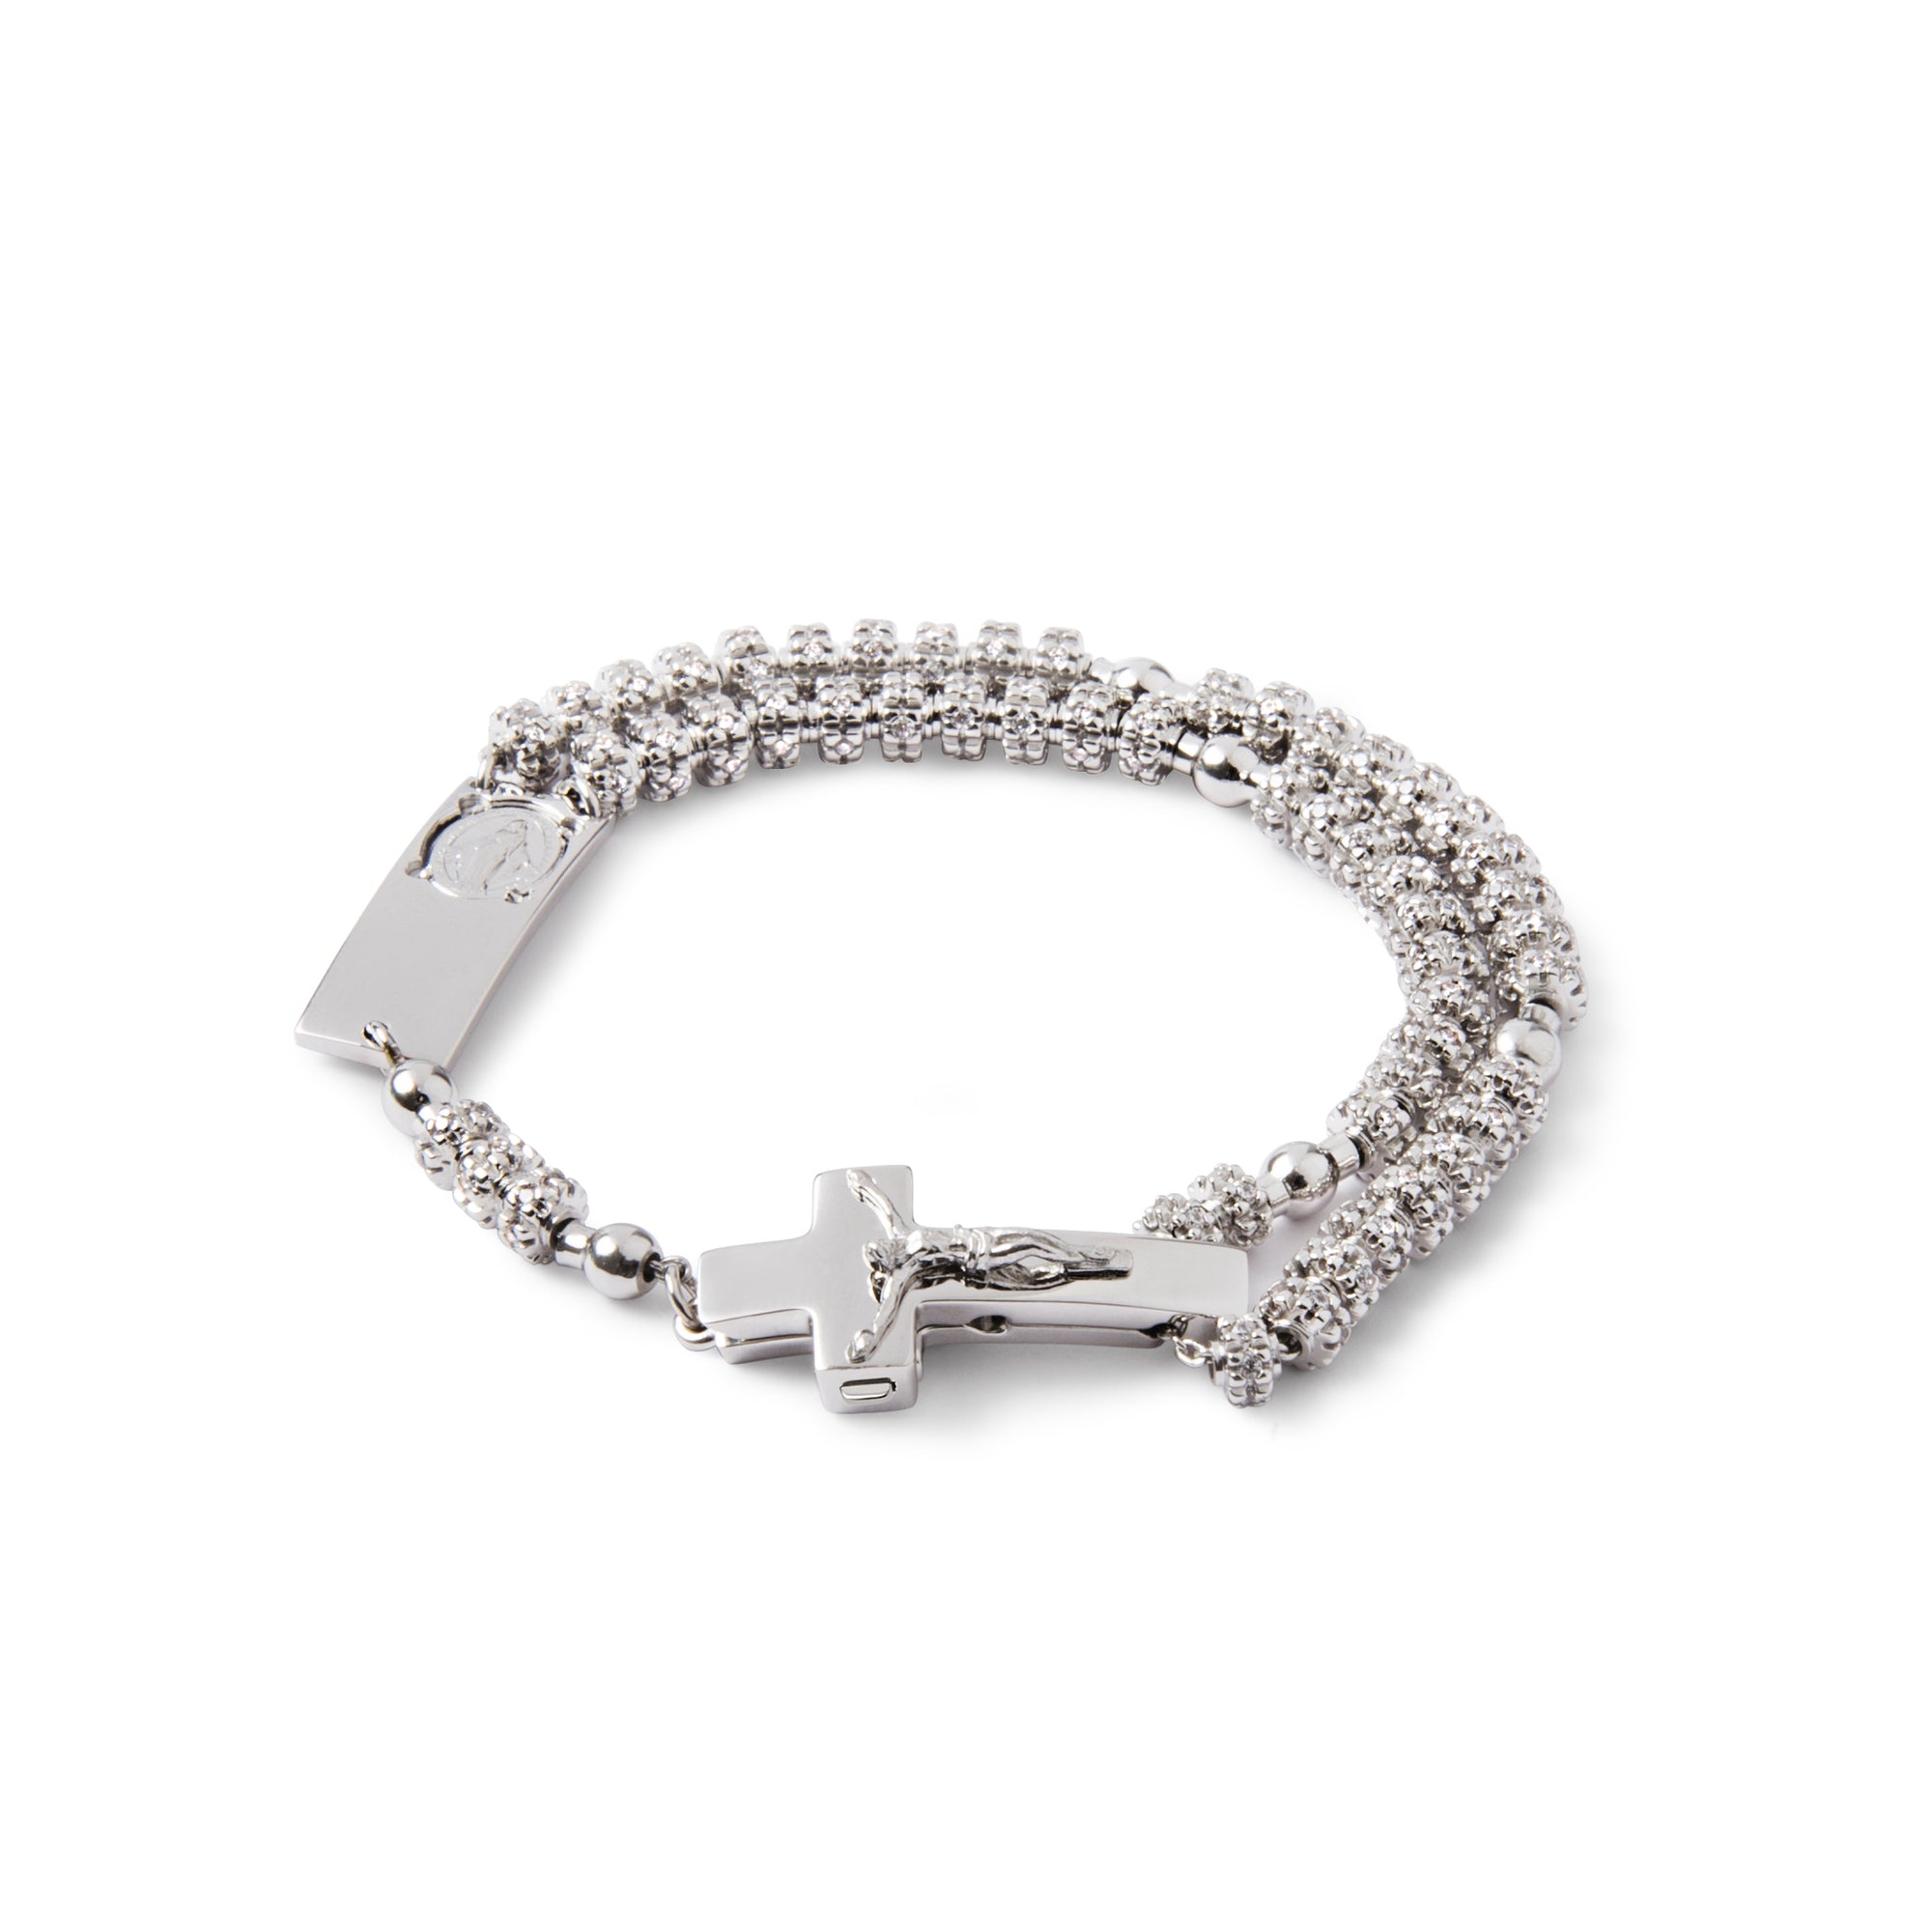 ROSALET® FULLY PAVE RHODIUM BEADS , STERLING SILVER & ROUND PATER, TRADITIONAL